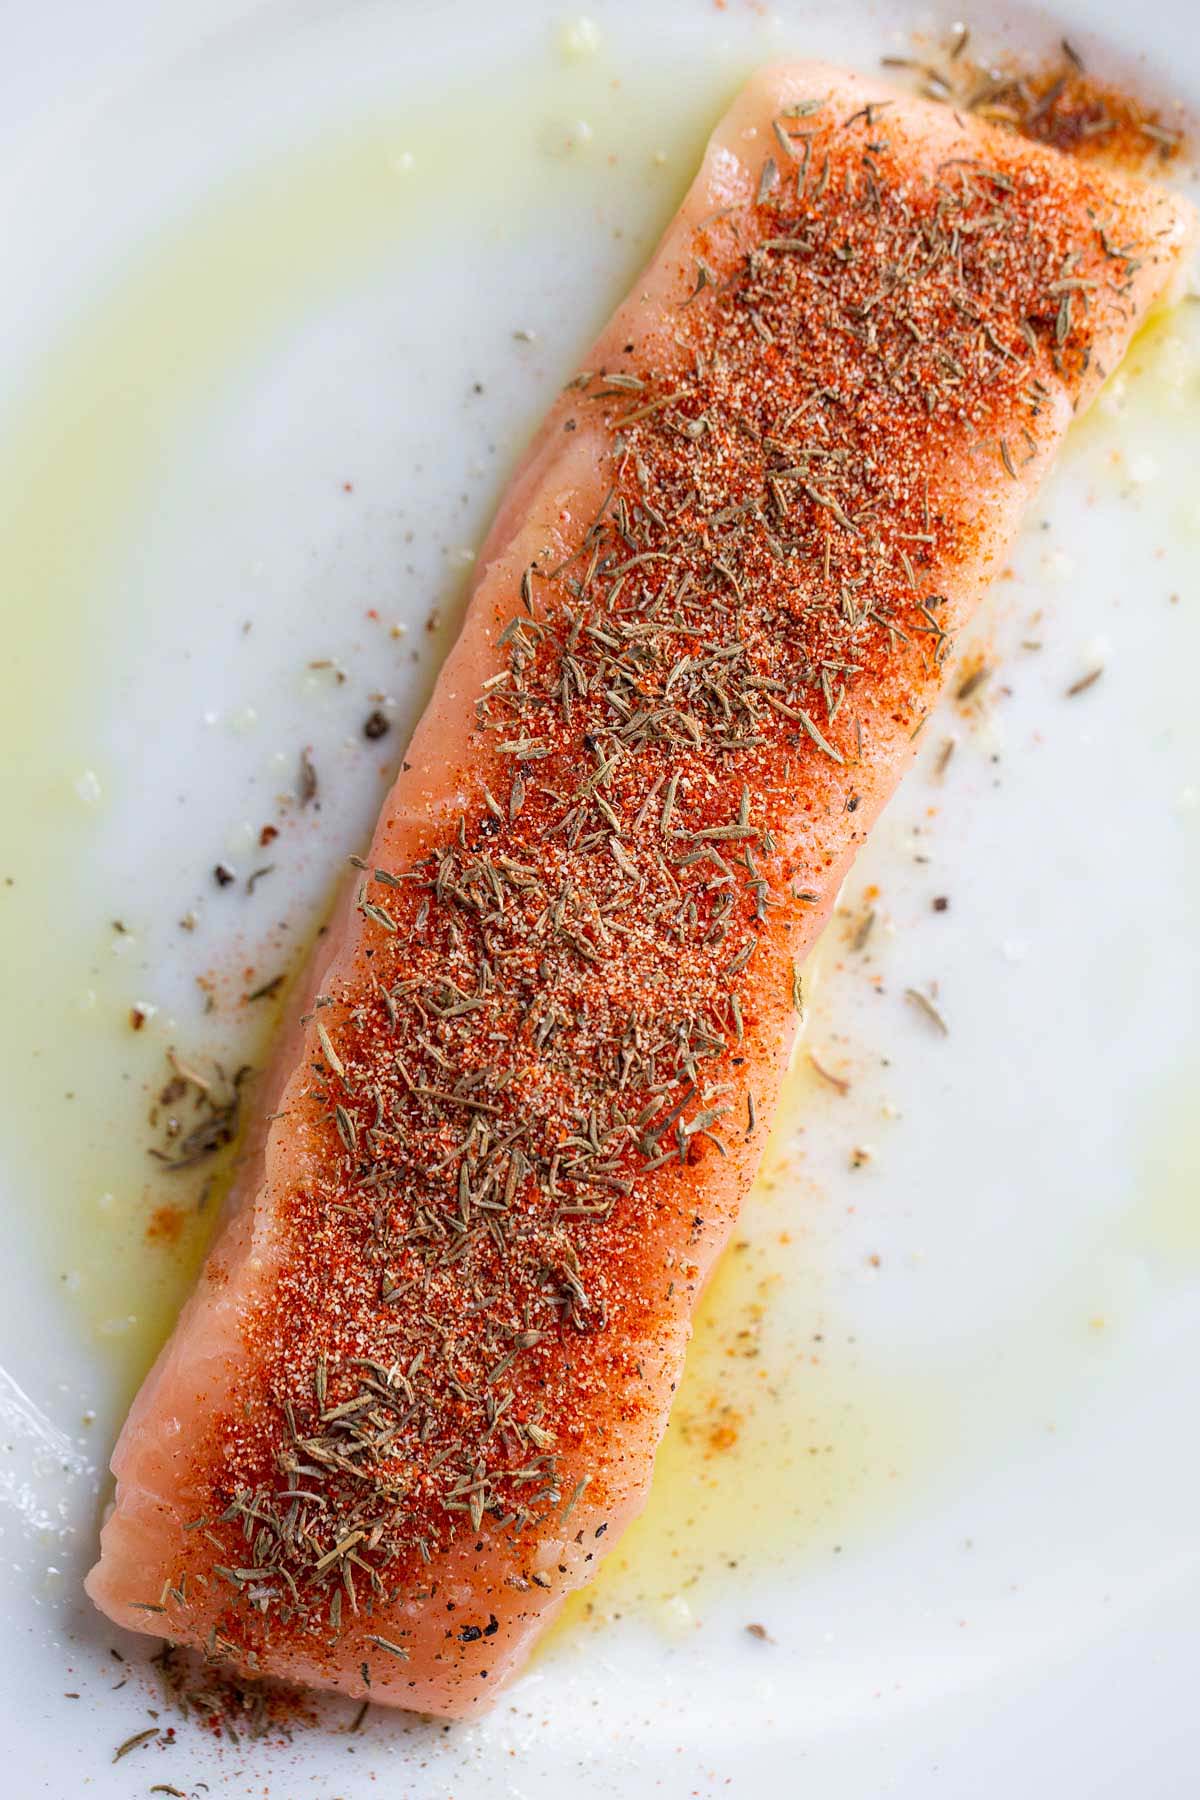 Uncooked salmon with spices.